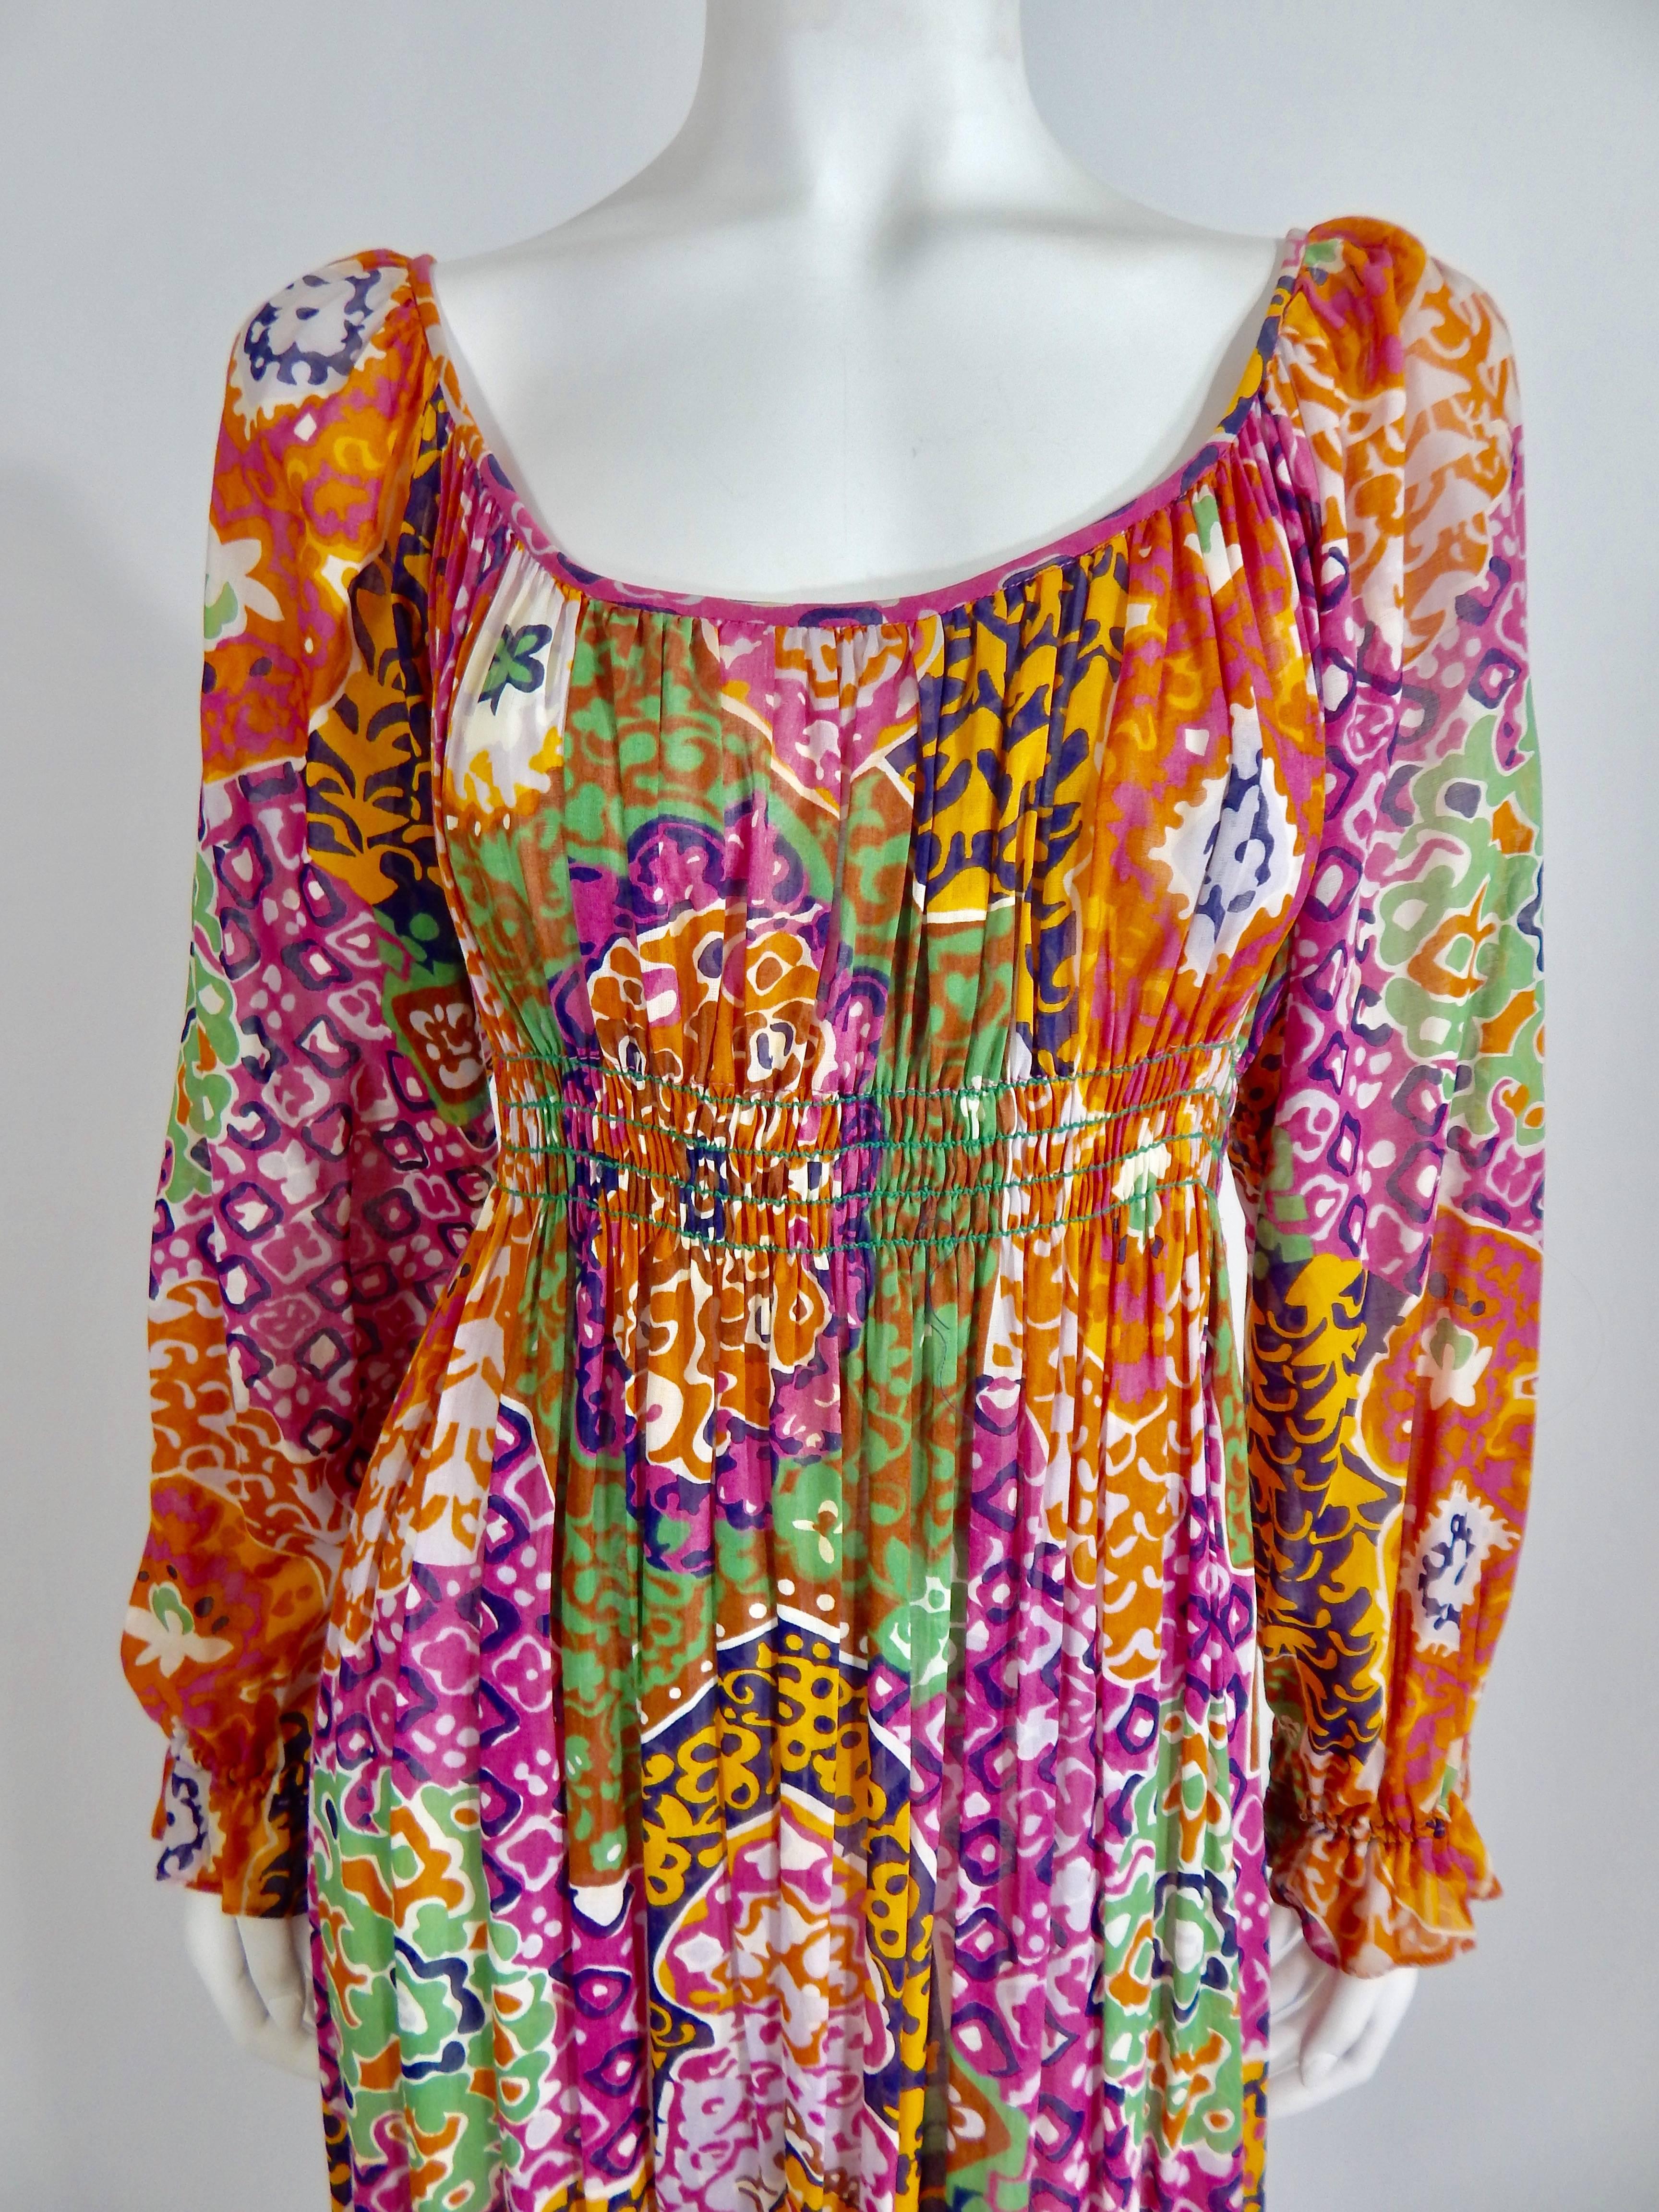 Vintage Late 1960s / Early 1970s Bohemian Maxi Dress. 100% Cotton Printed with bright colors of Pink, Purple, Orange, Green and Yellow. Slightly Sheer Fabric. Approximate modern day size 4 - 6. Excellent Condition. 
US Domestic Shipping in